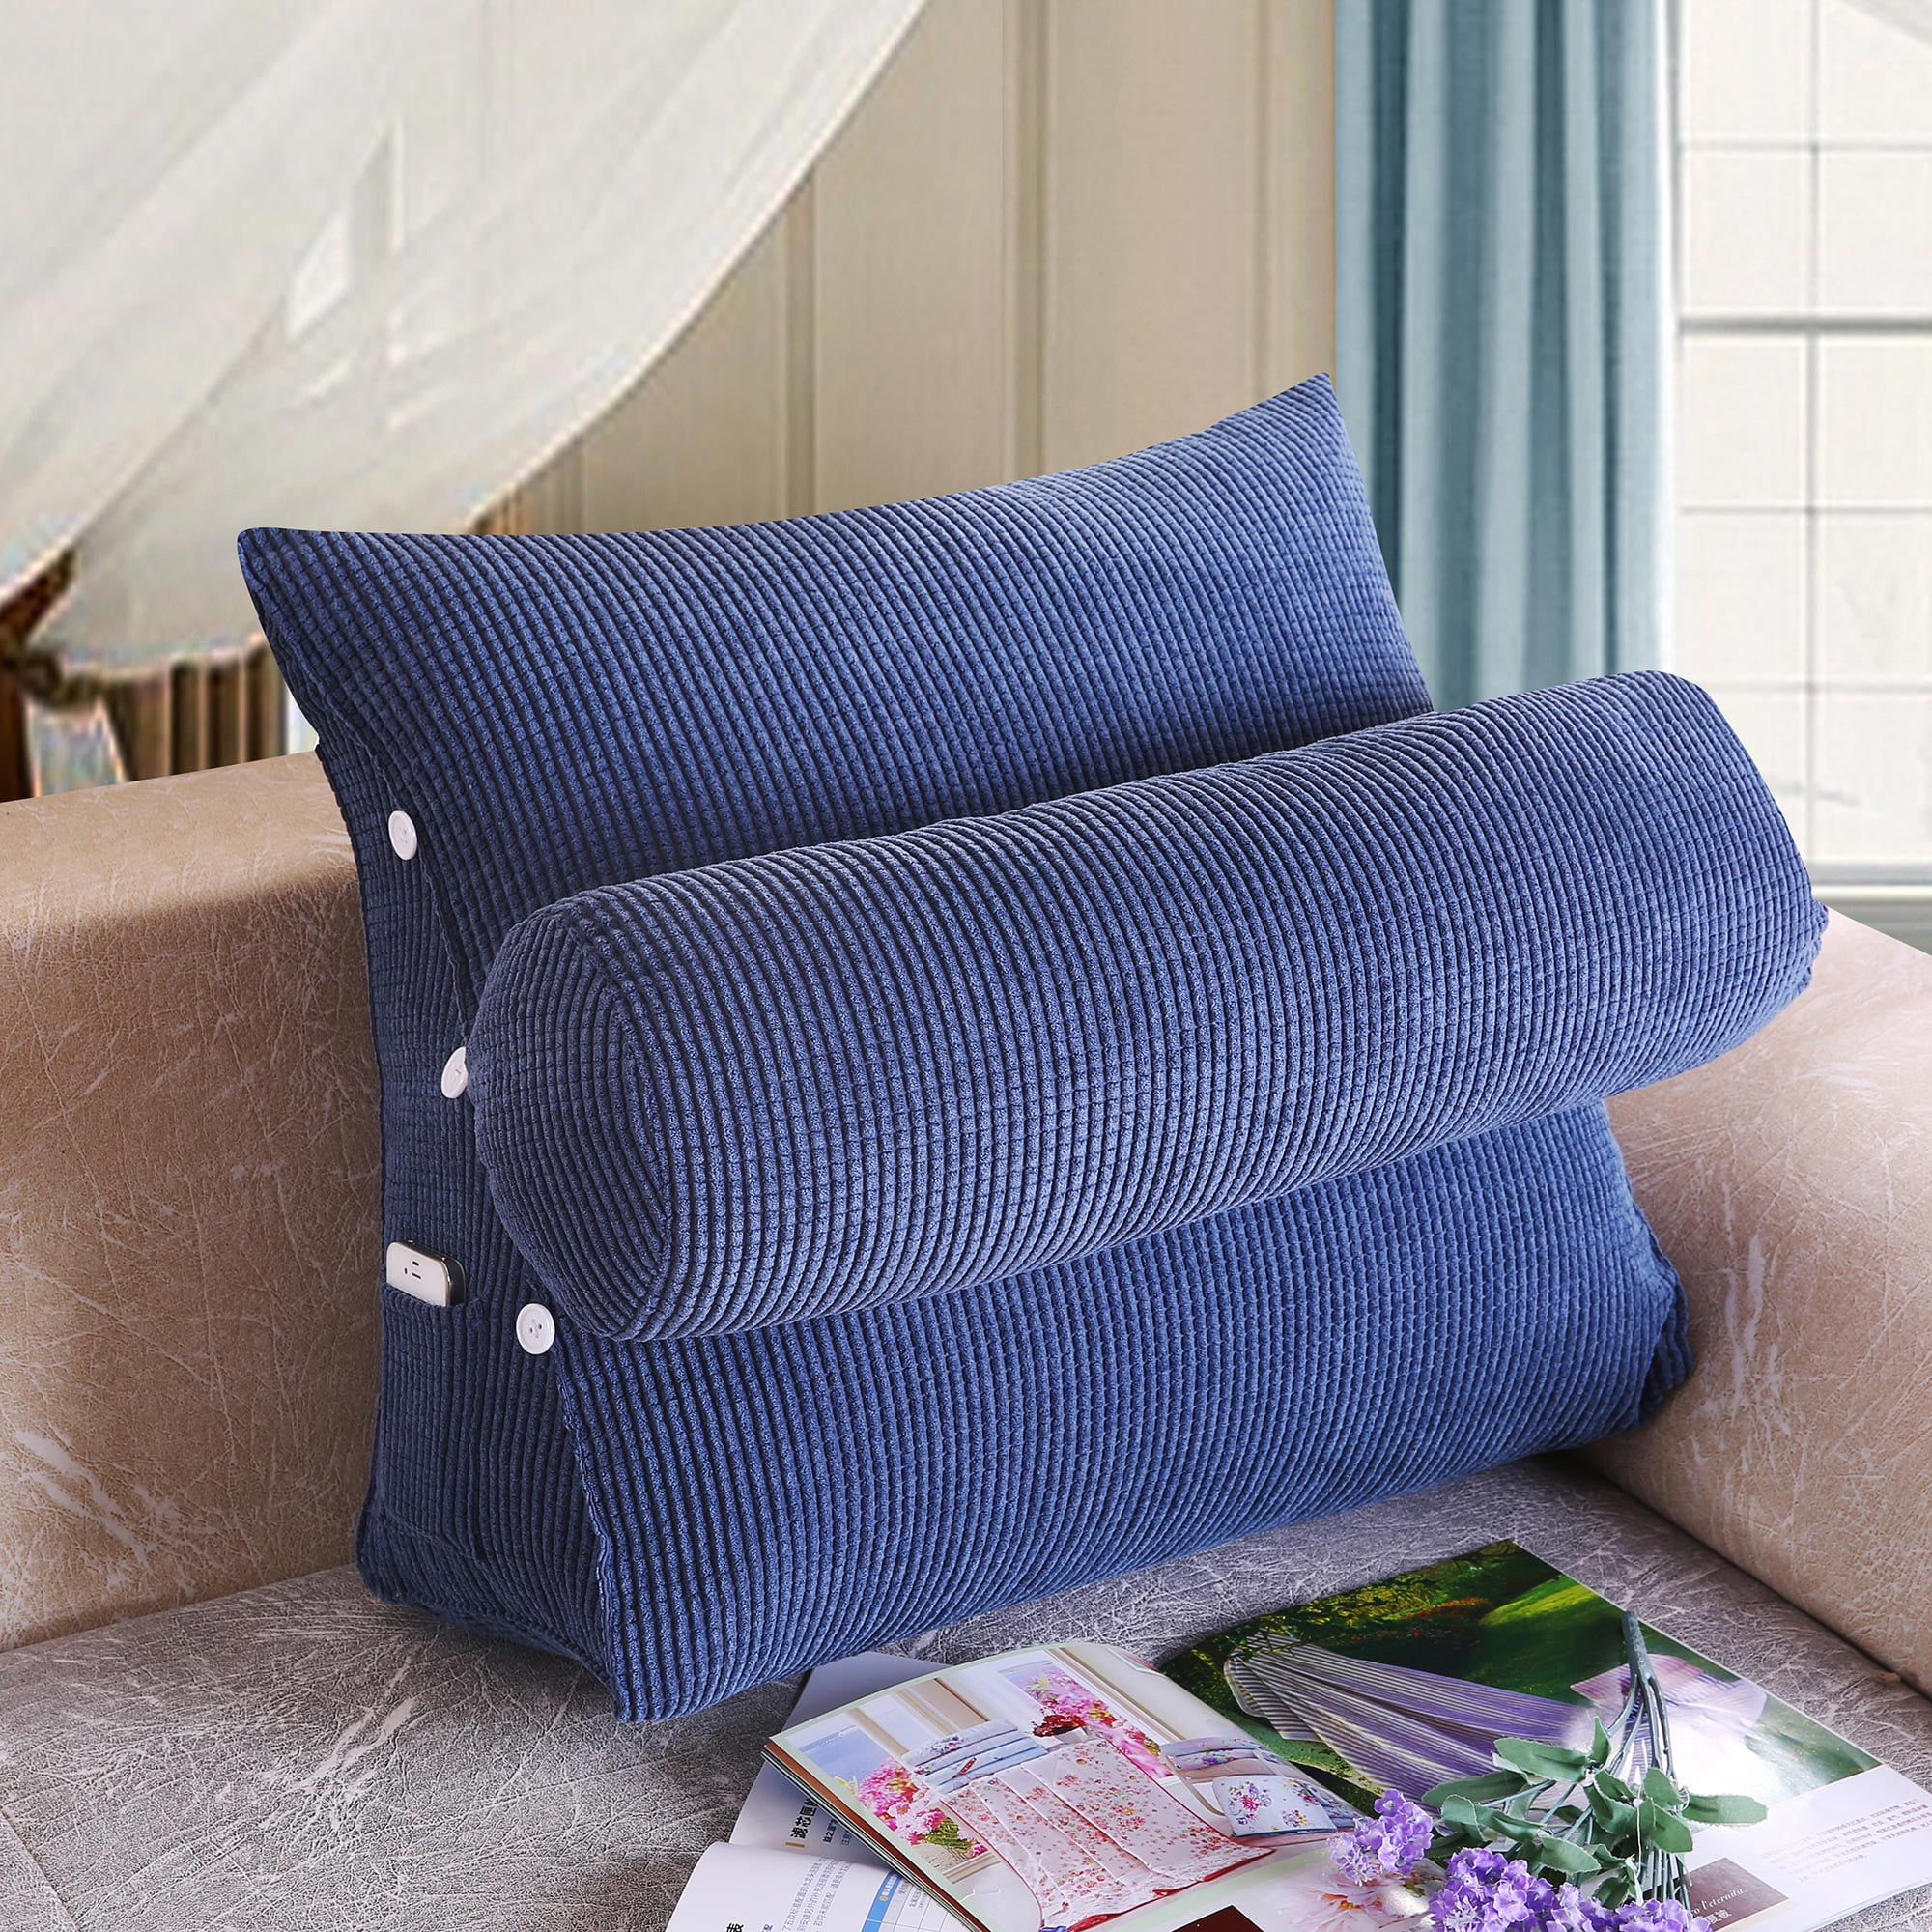 DODOING Soft Adjustable Back Wedge Cushion Reading Back Support Pillow Triangle Back Cushion for